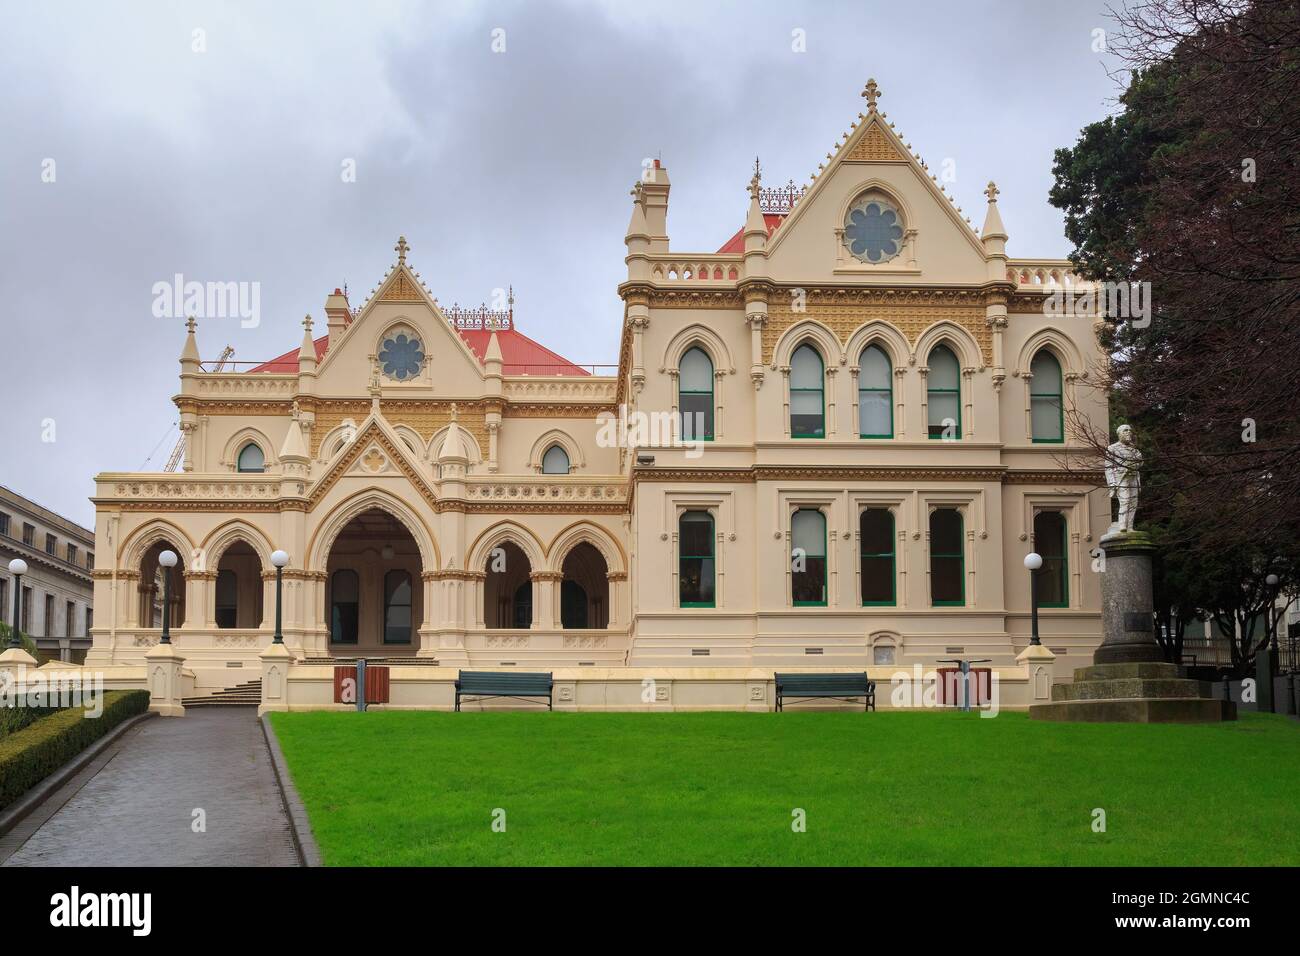 The Parliamentary Library in Wellington, New Zealand. This gothic revival building, opened in 1899, is the oldest building on the parliament grounds Stock Photo